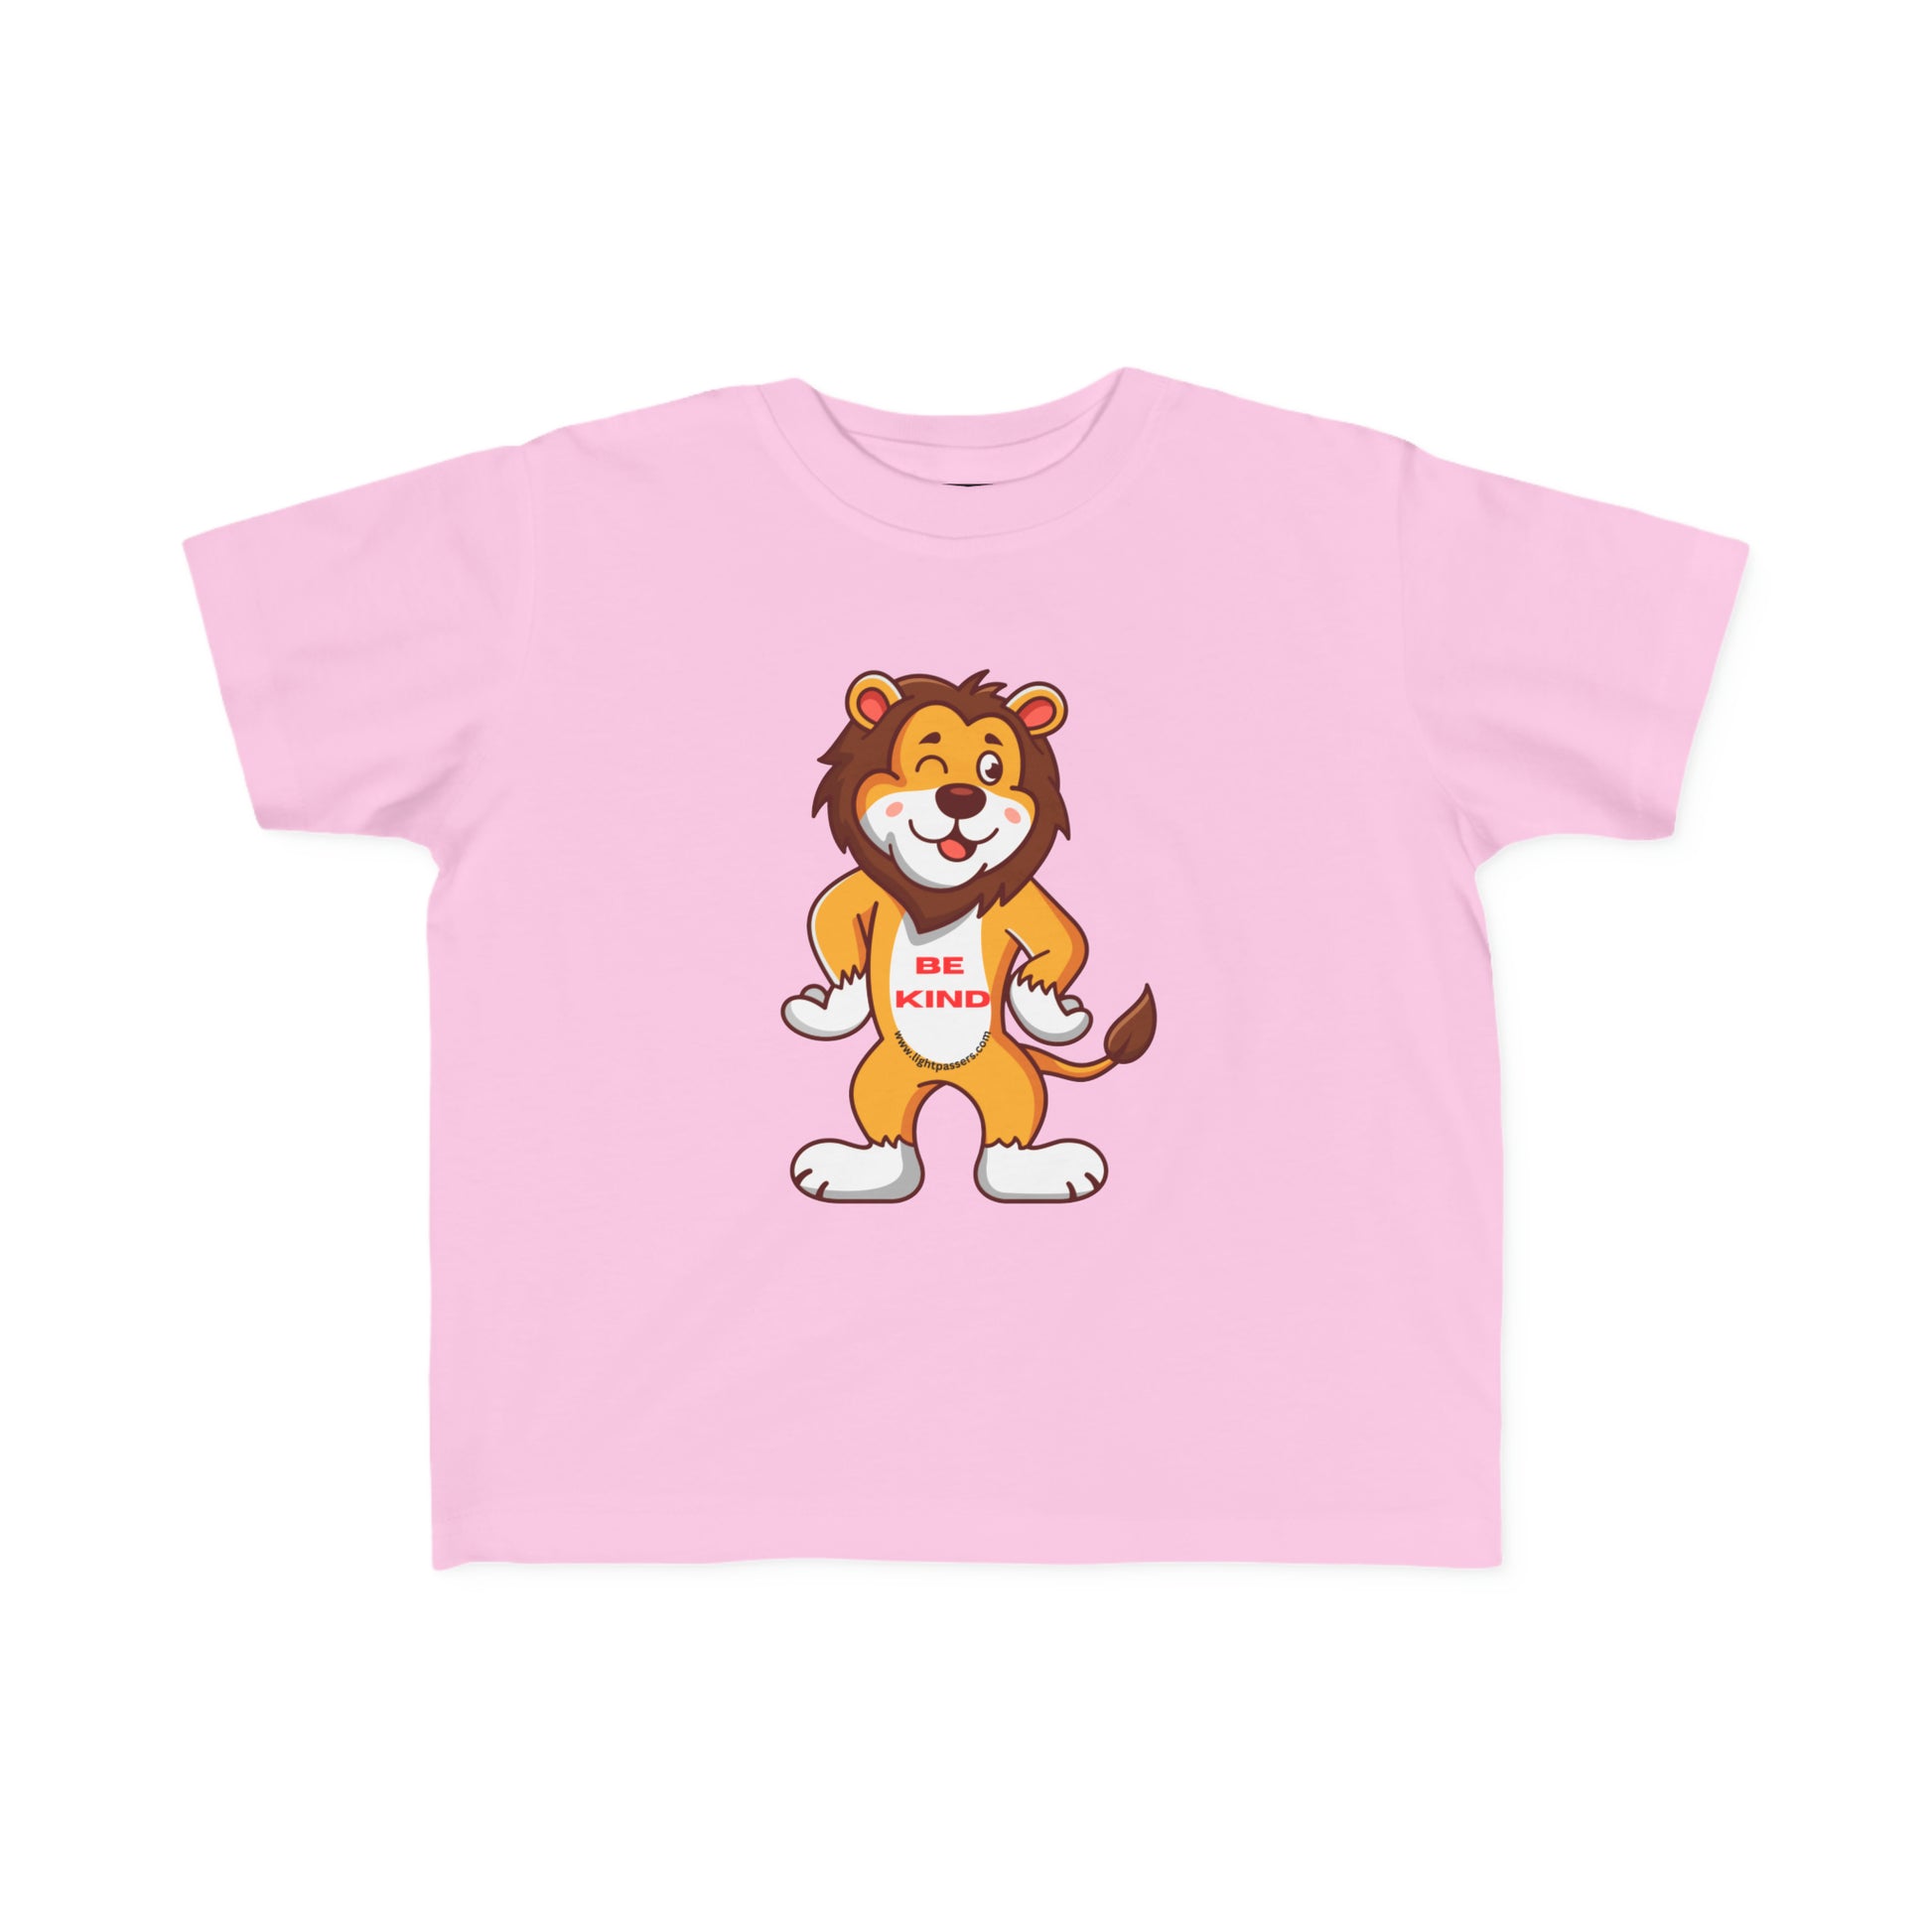 A toddler's tee featuring a cartoon lion design, soft 100% combed cotton, durable print, and tear-away label. Classic fit, 4.5 oz light fabric. Be Kind Lion Toddler T-shirt.